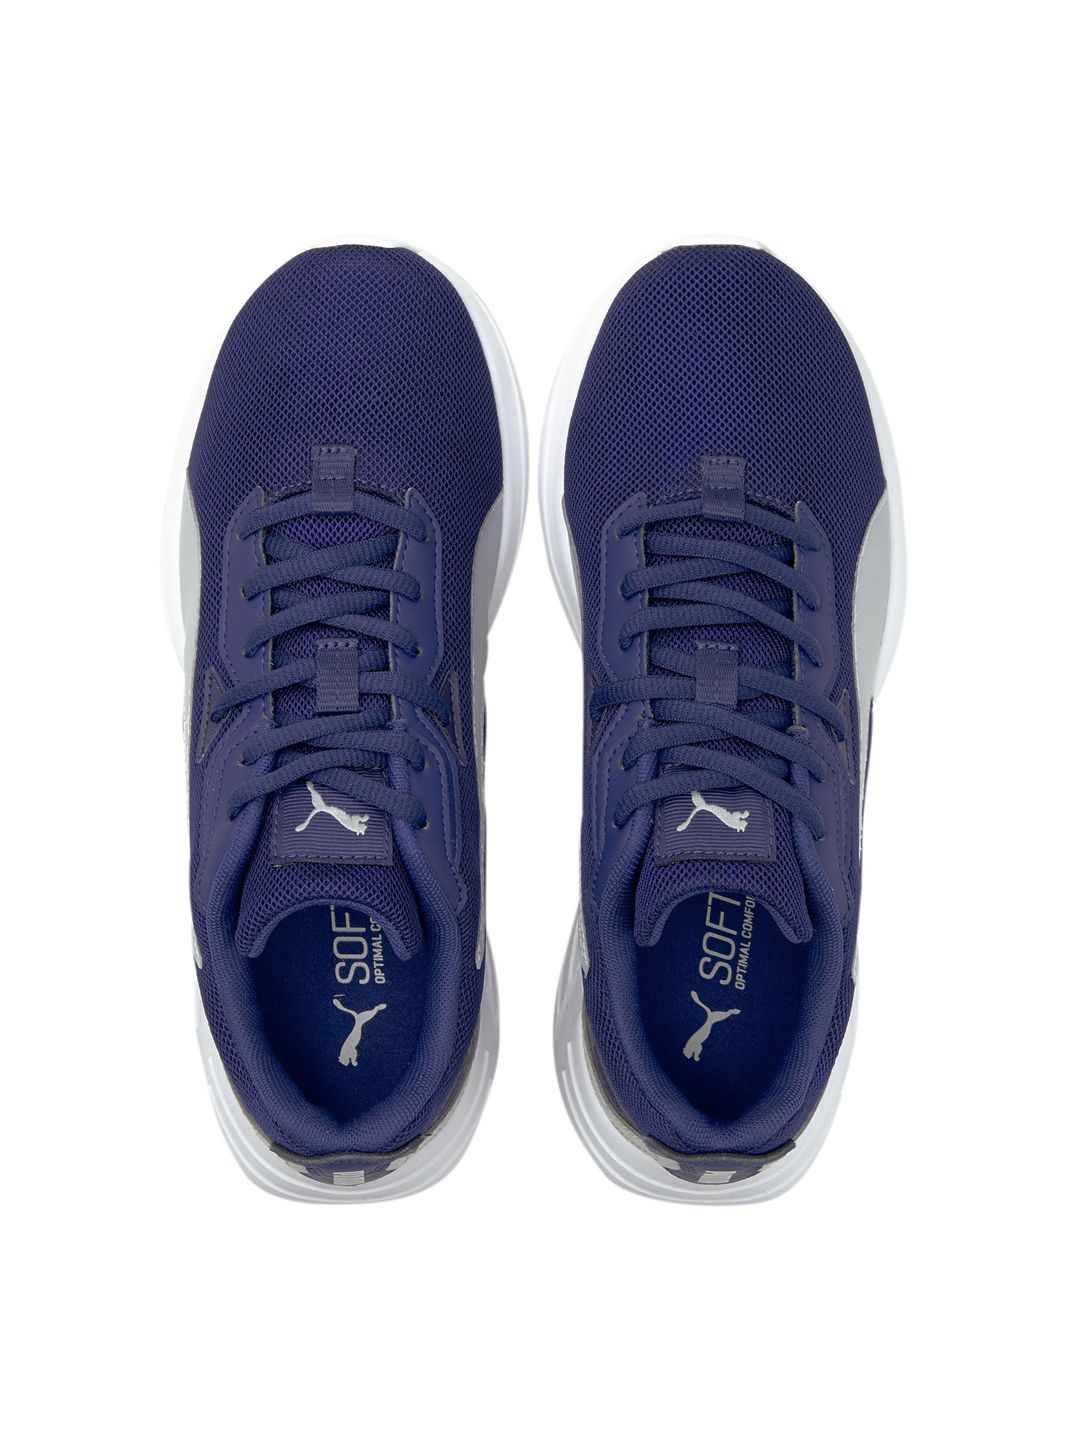 Puma Unisex Blue Space Runner Shoes Price in India